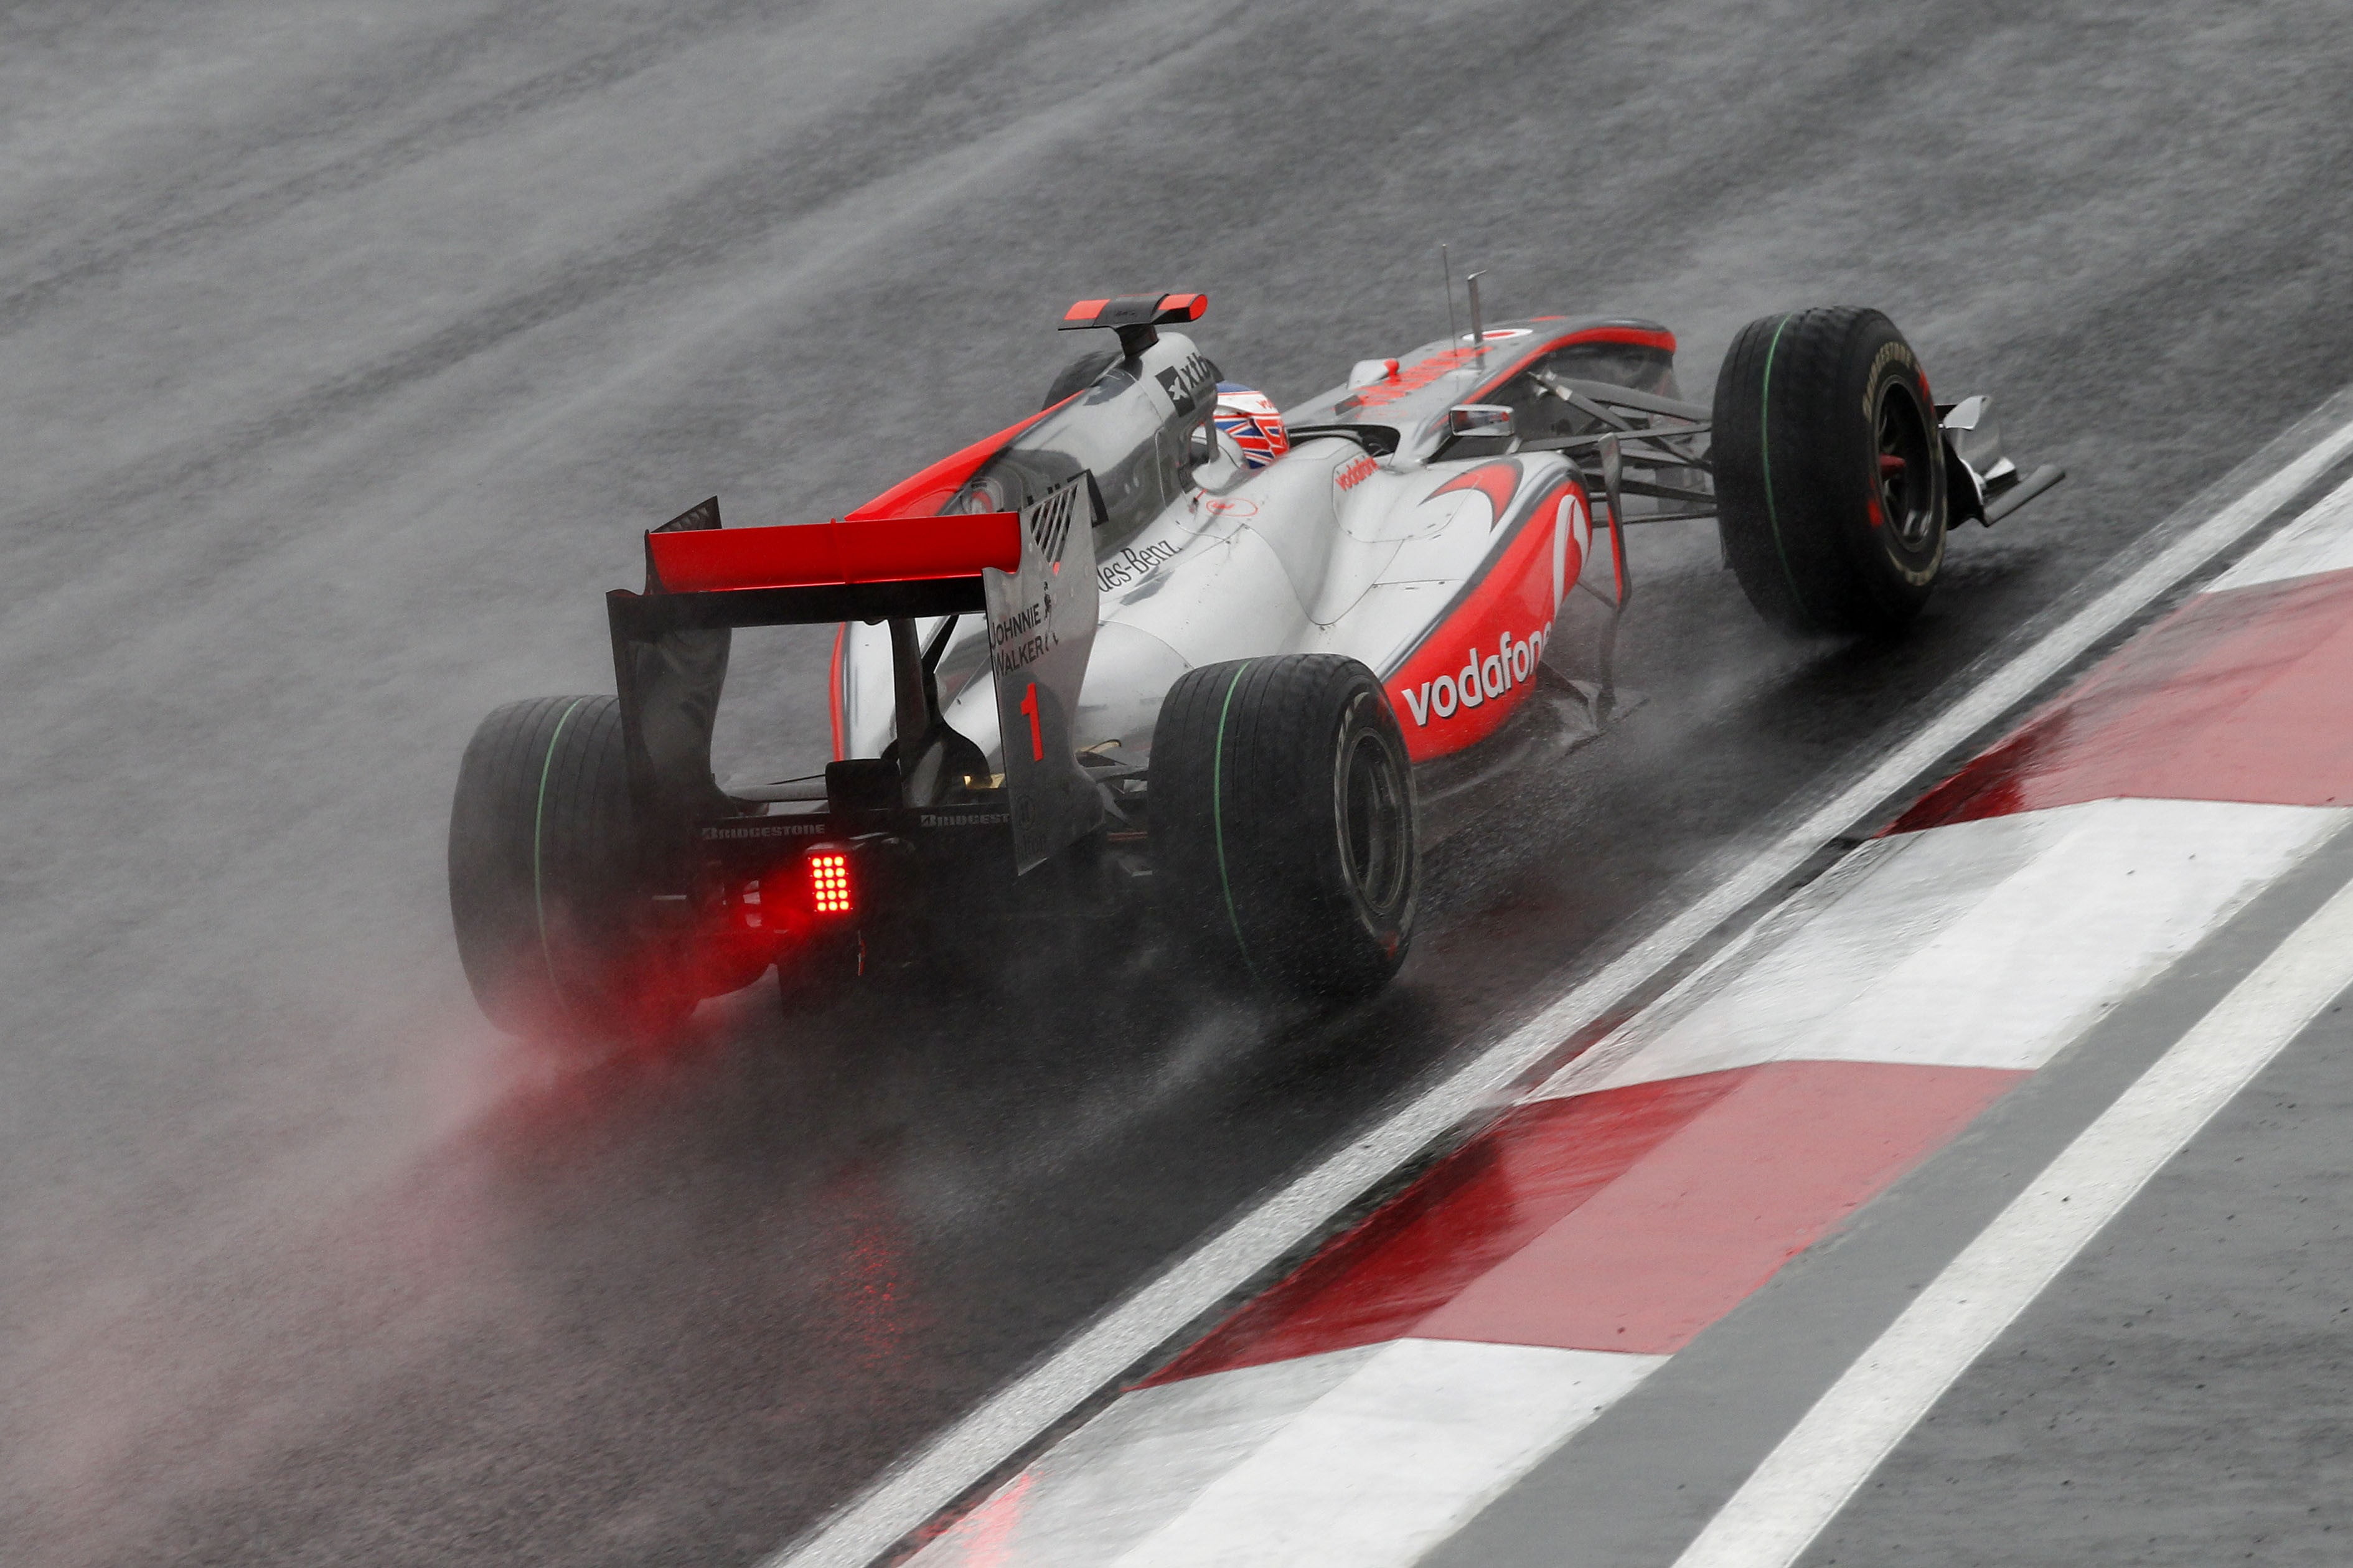 2160x1440 resolution | white and red racing car, Formula 1, race cars ...